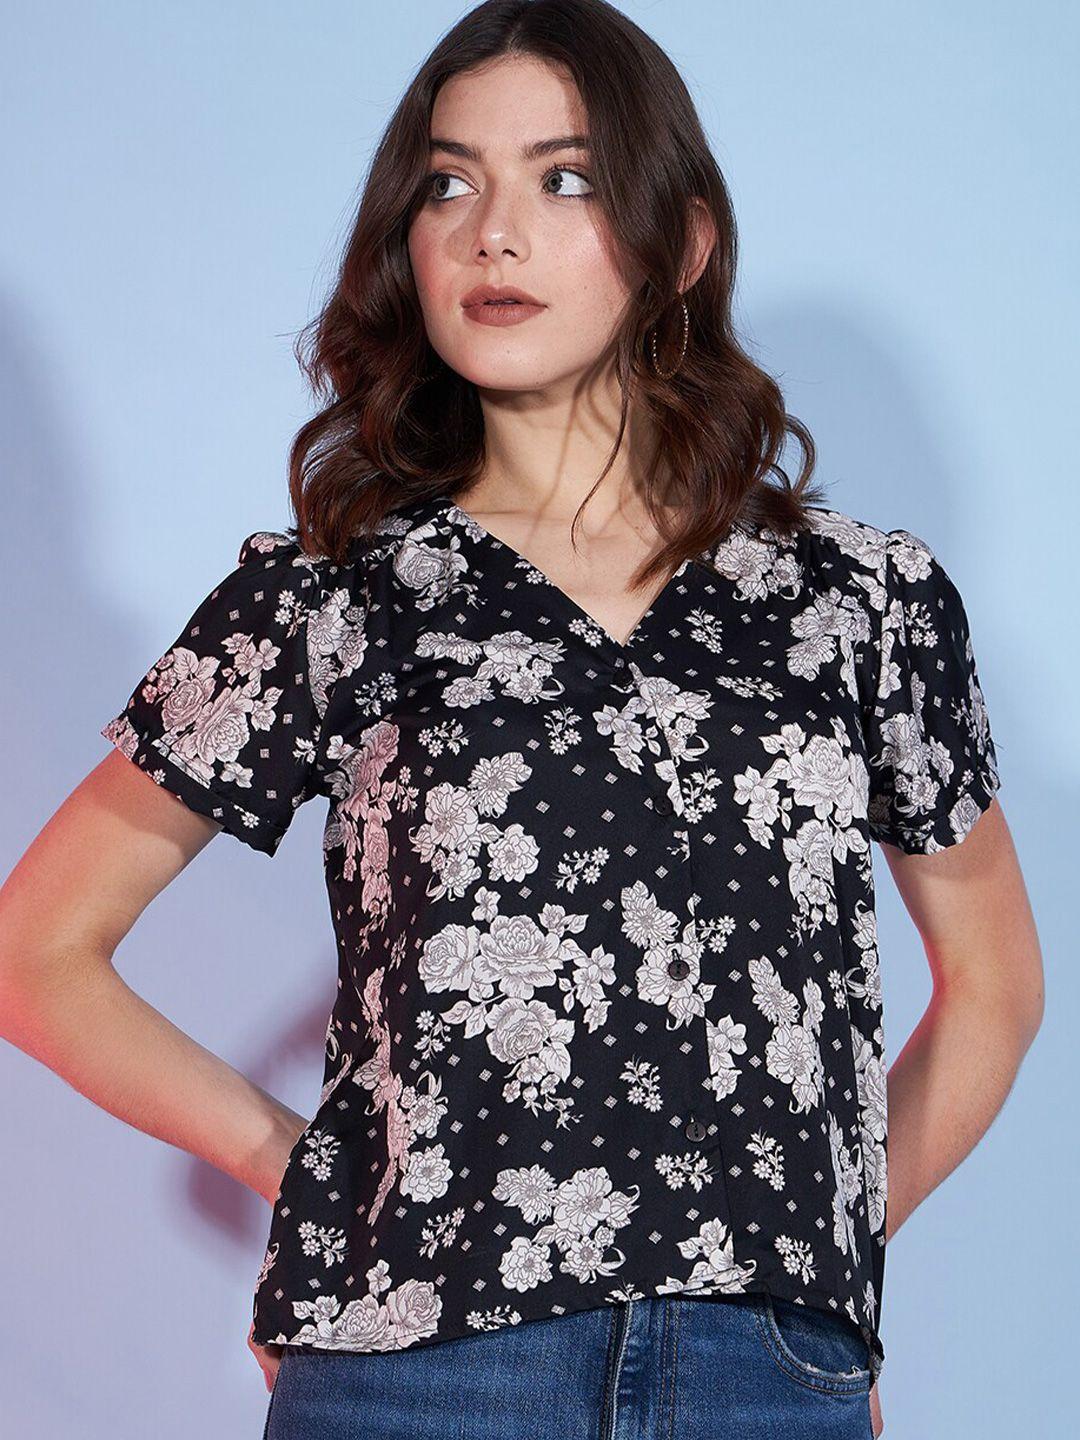 dressberry-black-floral-print-puff-sleeve-shirt-style-top